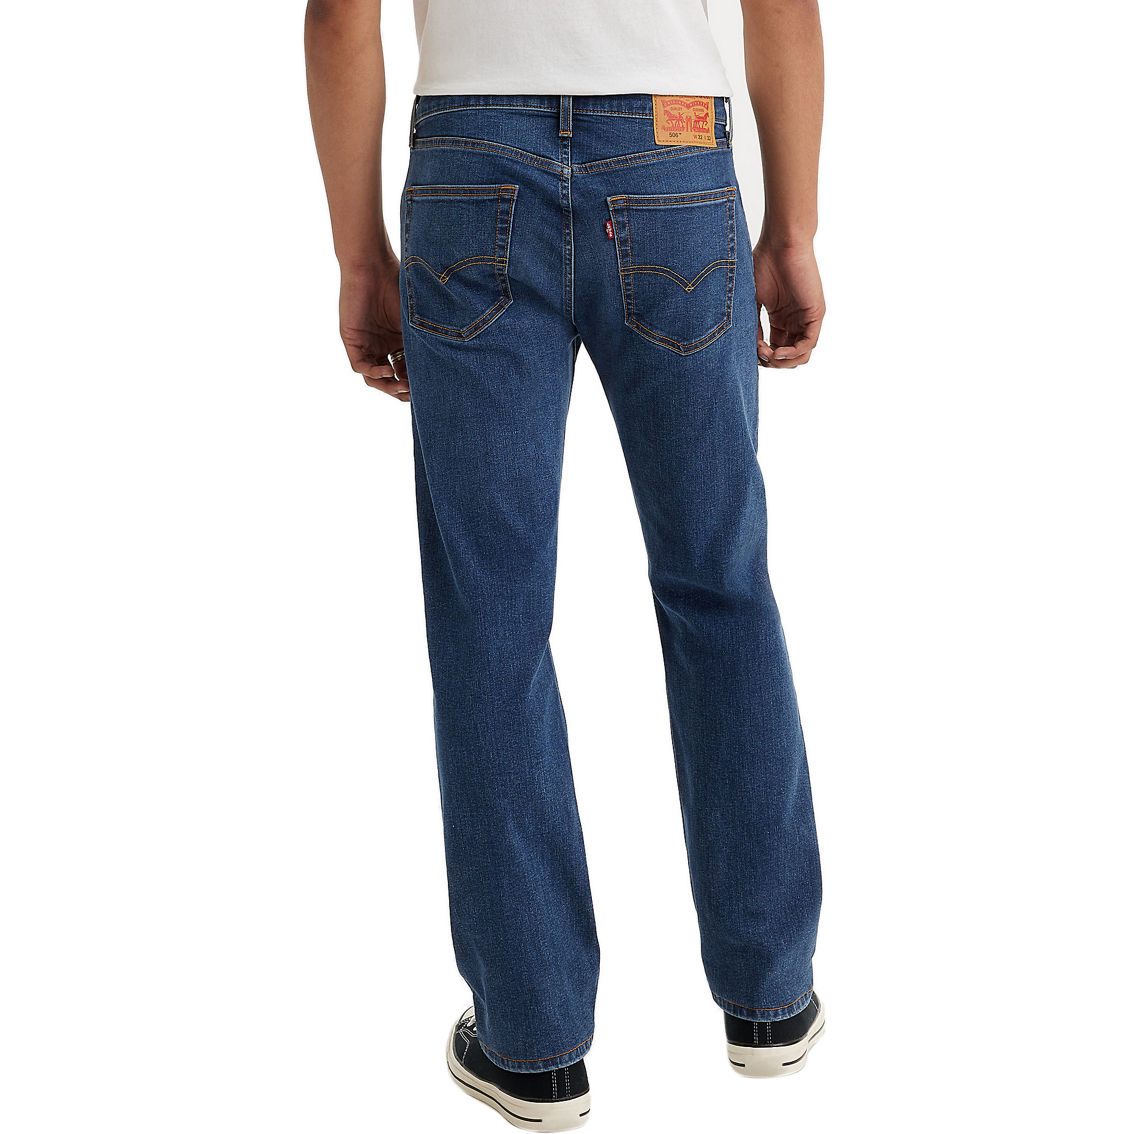 Levi's 506 Straight Fit Jeans | Jeans | Clothing & Accessories | Shop ...